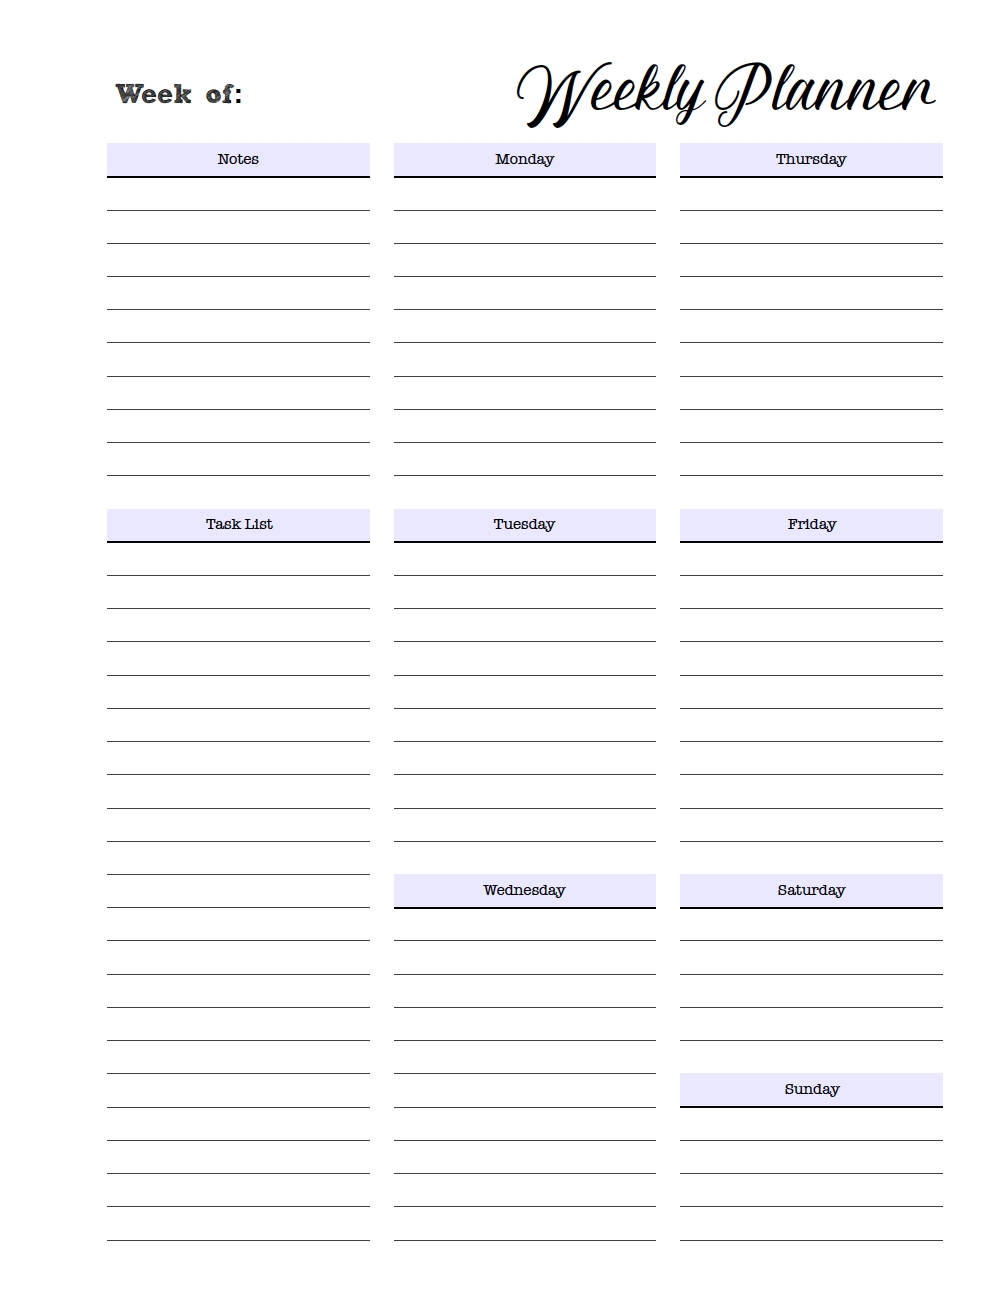 work planner monday to friday 53